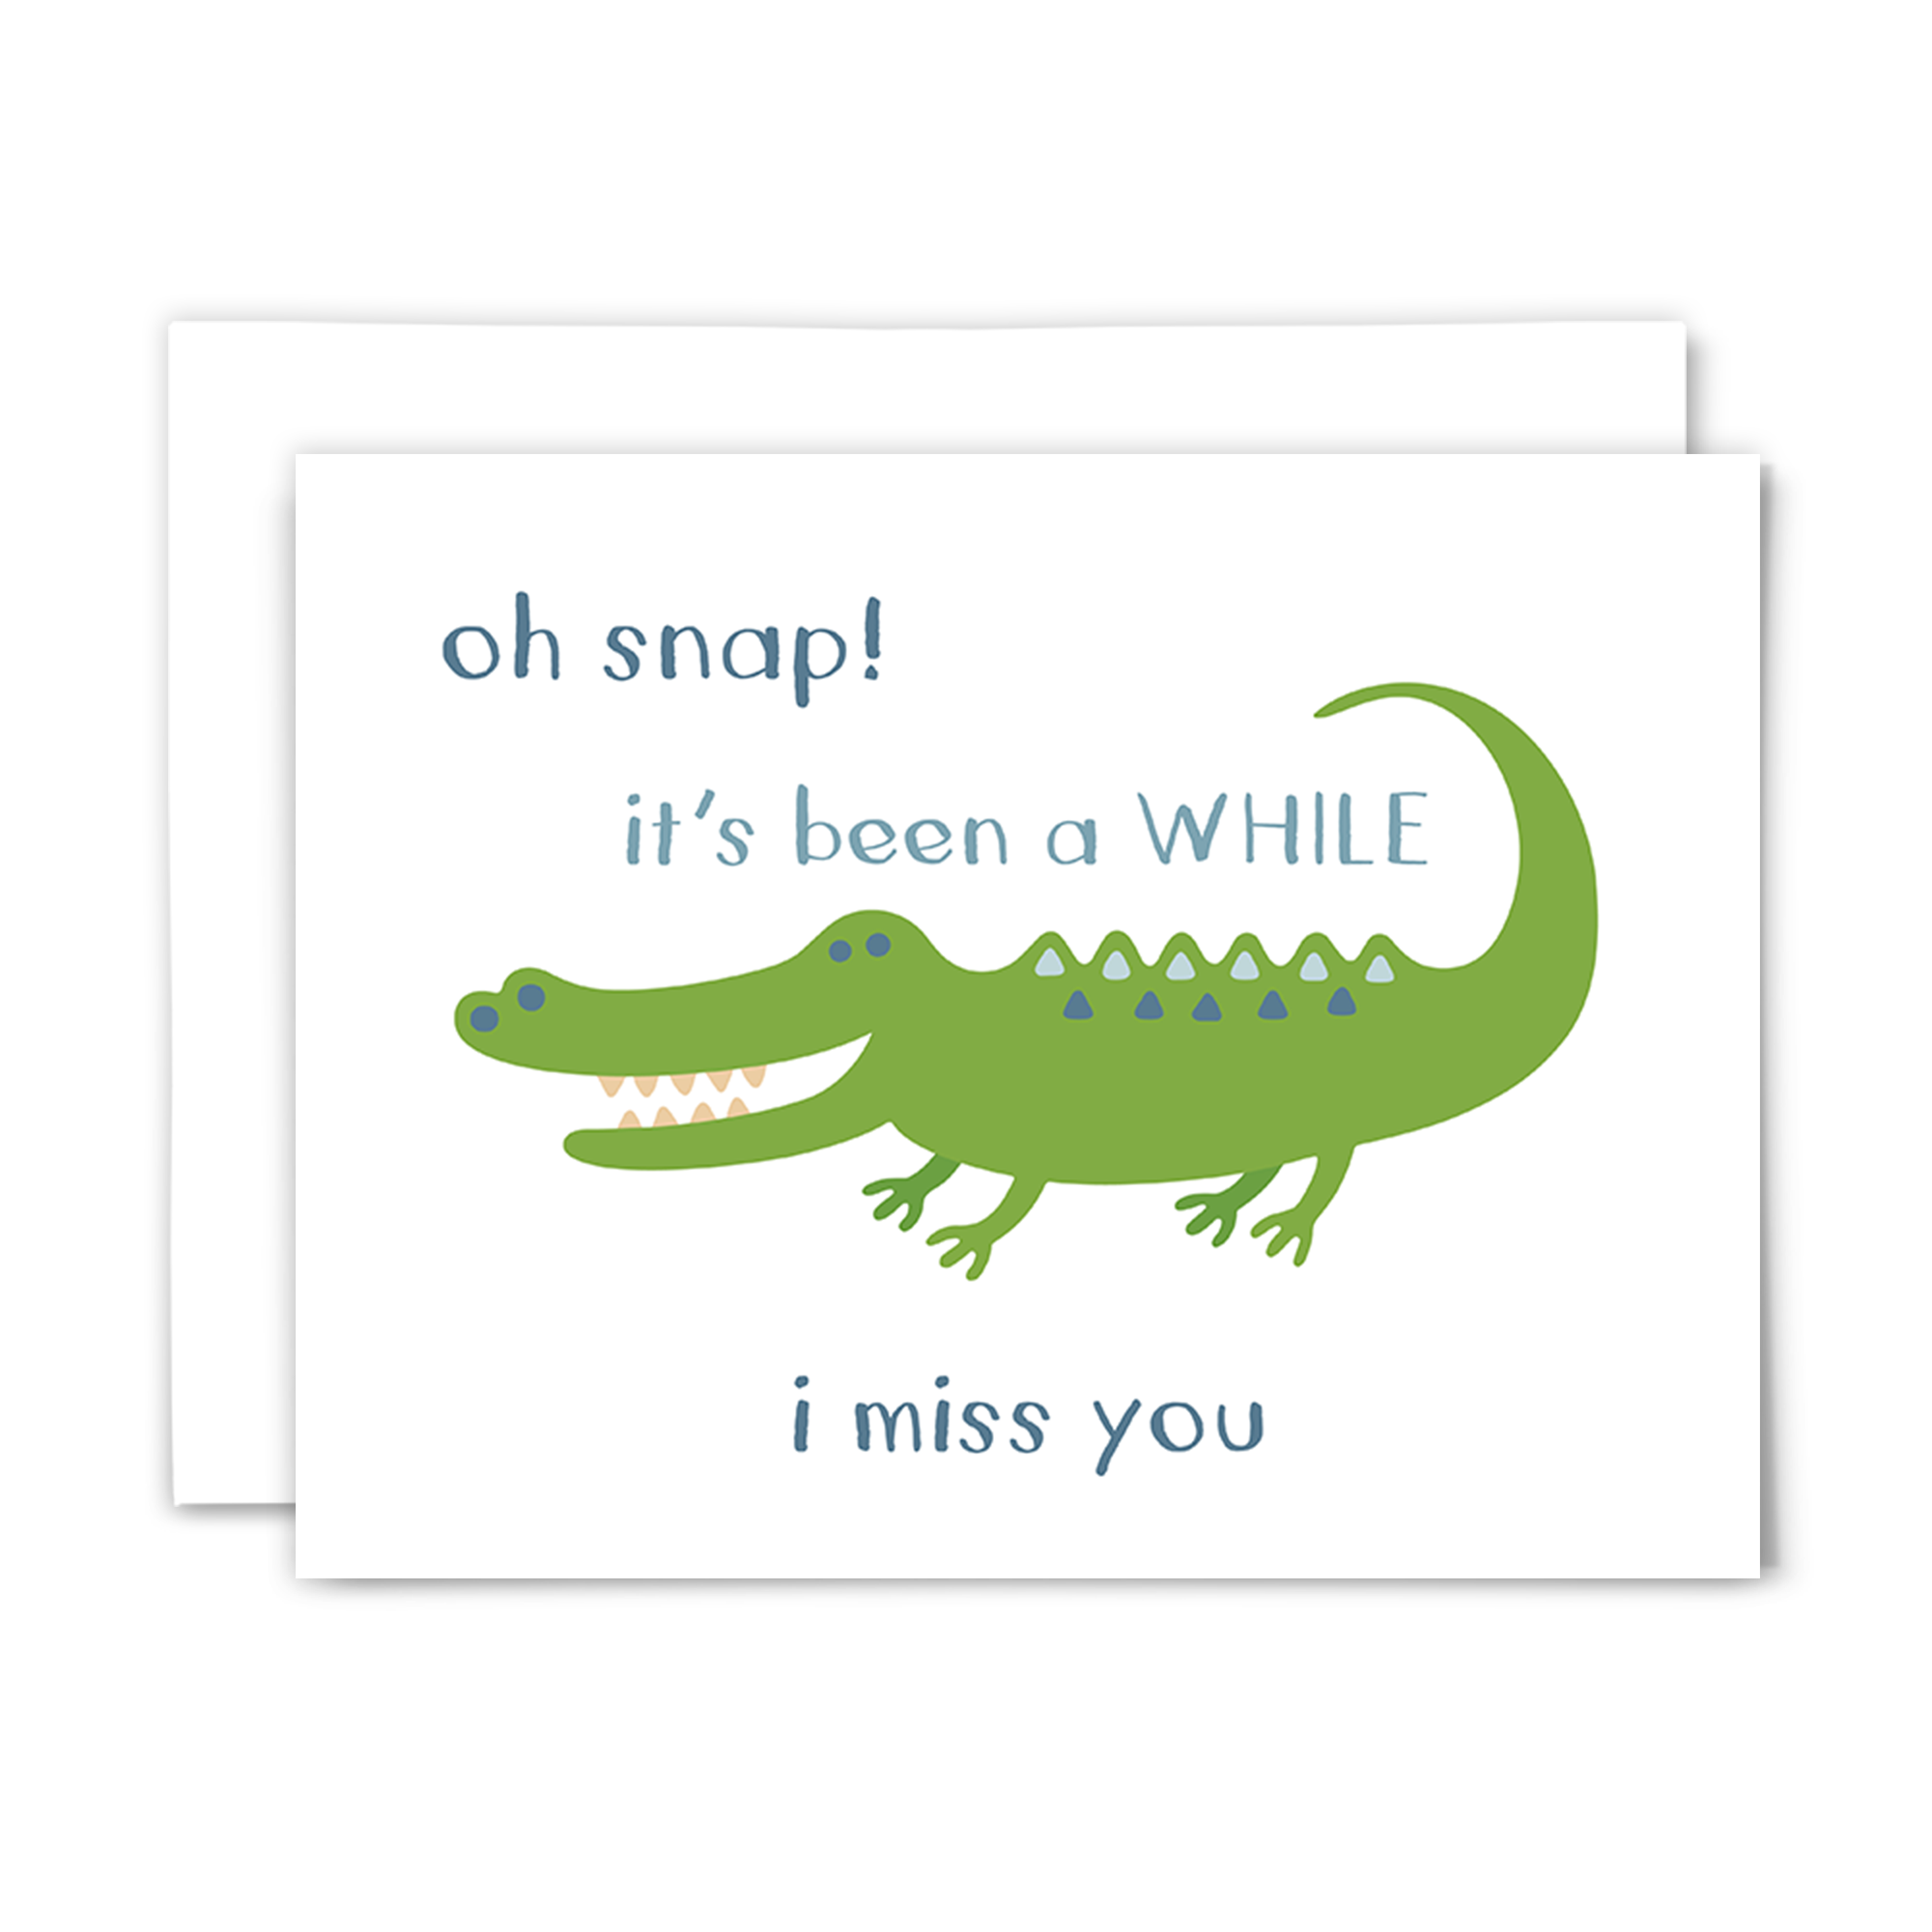 Folded A2 greeting card with blank interior and white envelope; front reads ""oh snap! it's been a WHILE ~ i miss you" with a big, green, cartoon crocodile with a big toothy smile on a white background